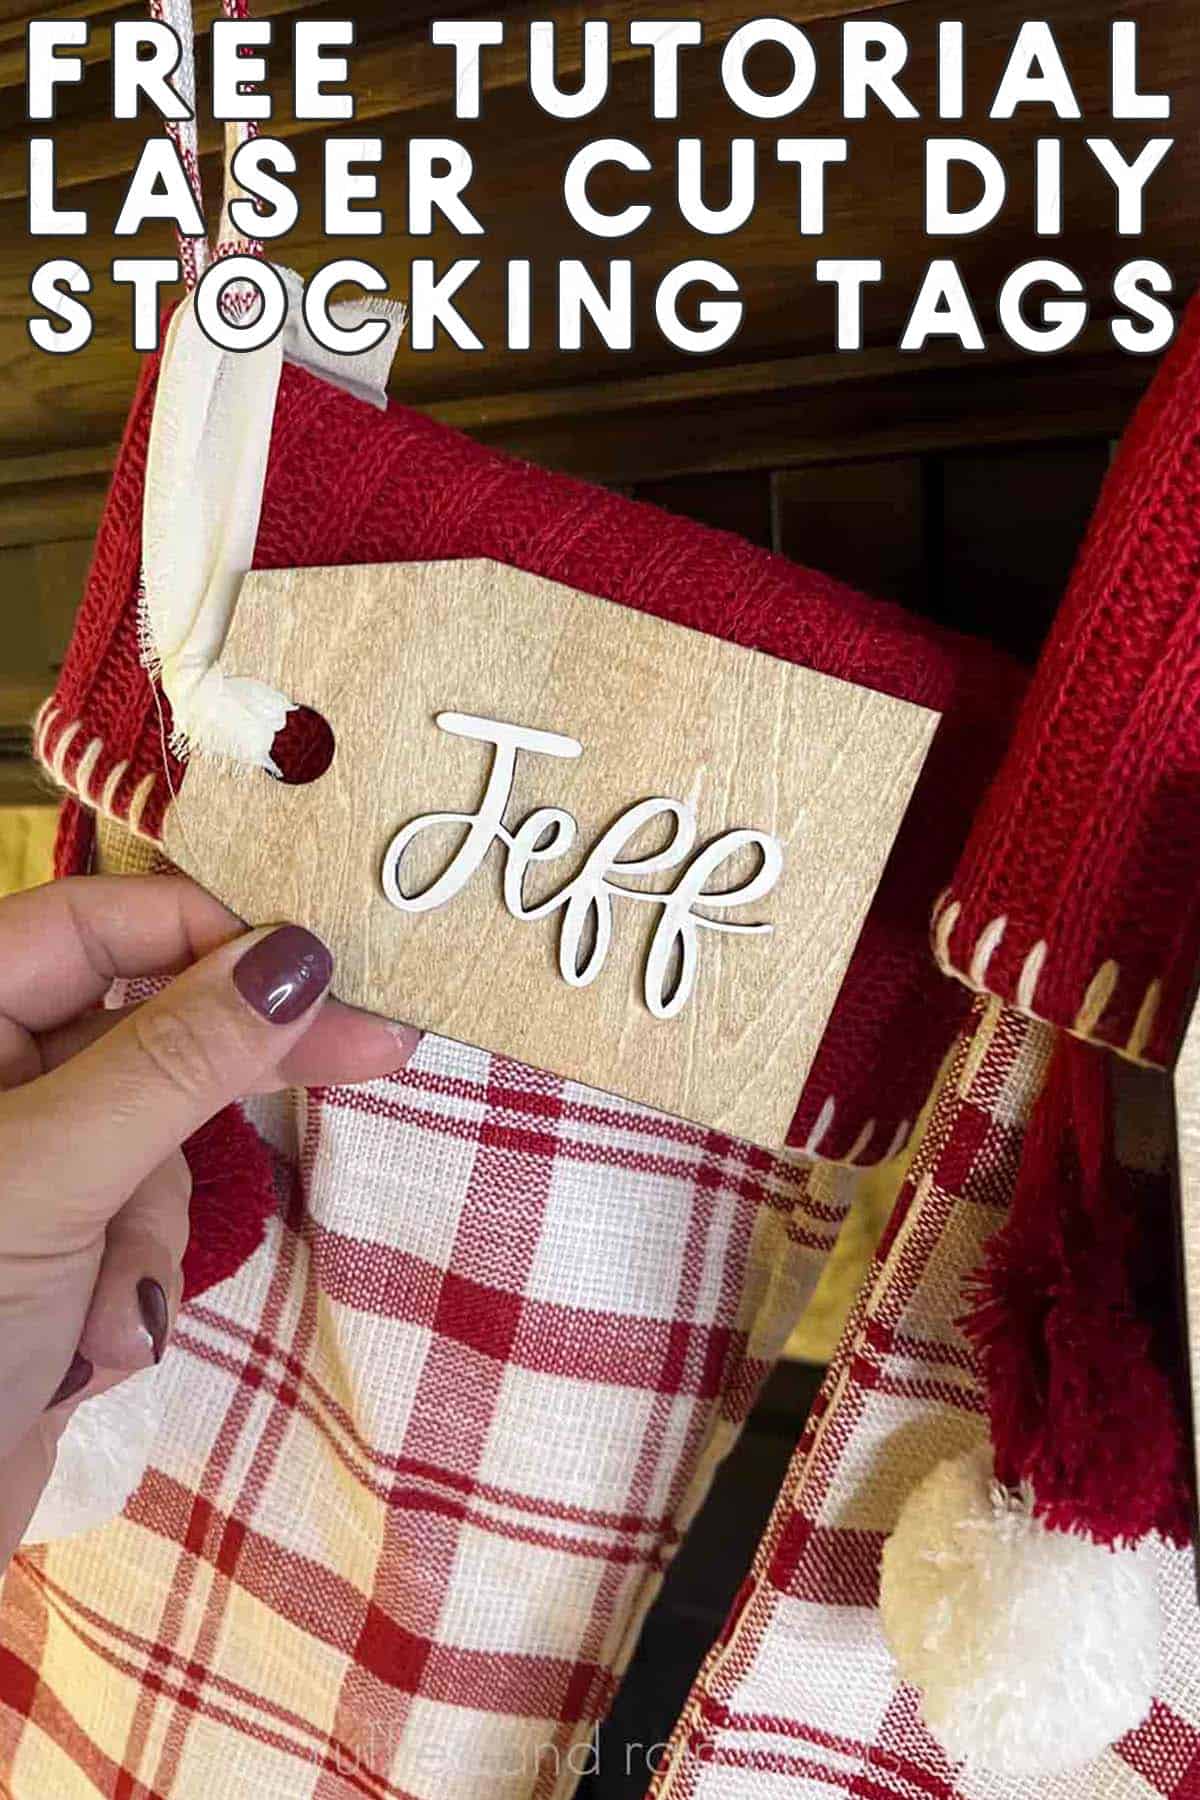 Vertical image of woman holding a wooden stocking tag in front of red plaid stocking with text which reads free tutorial laser cut DIY stocking tags.